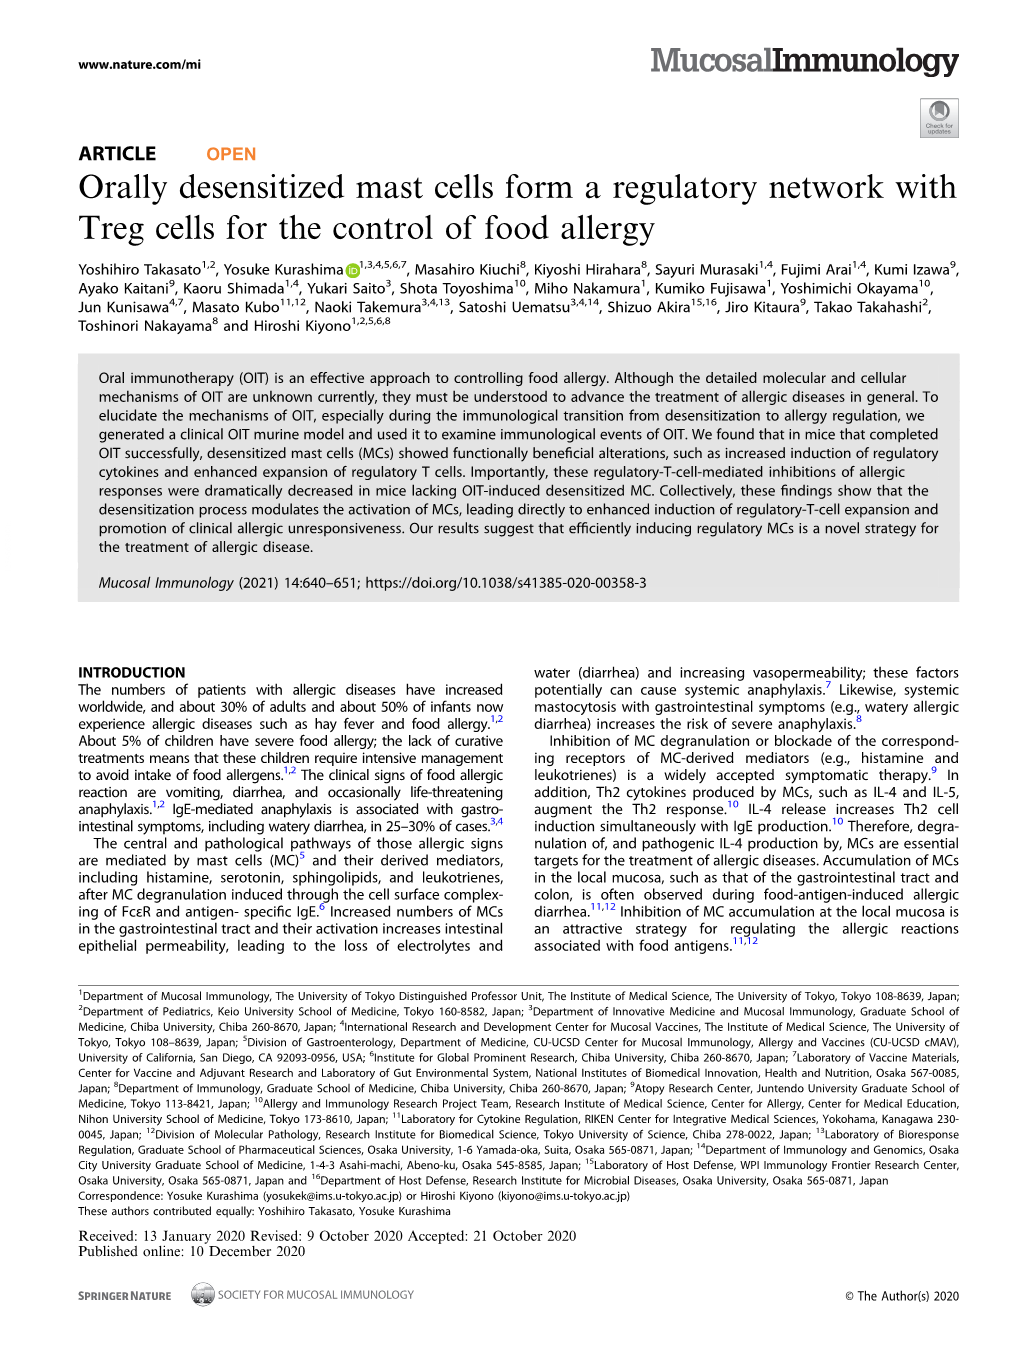 Orally Desensitized Mast Cells Form a Regulatory Network with Treg Cells for the Control of Food Allergy